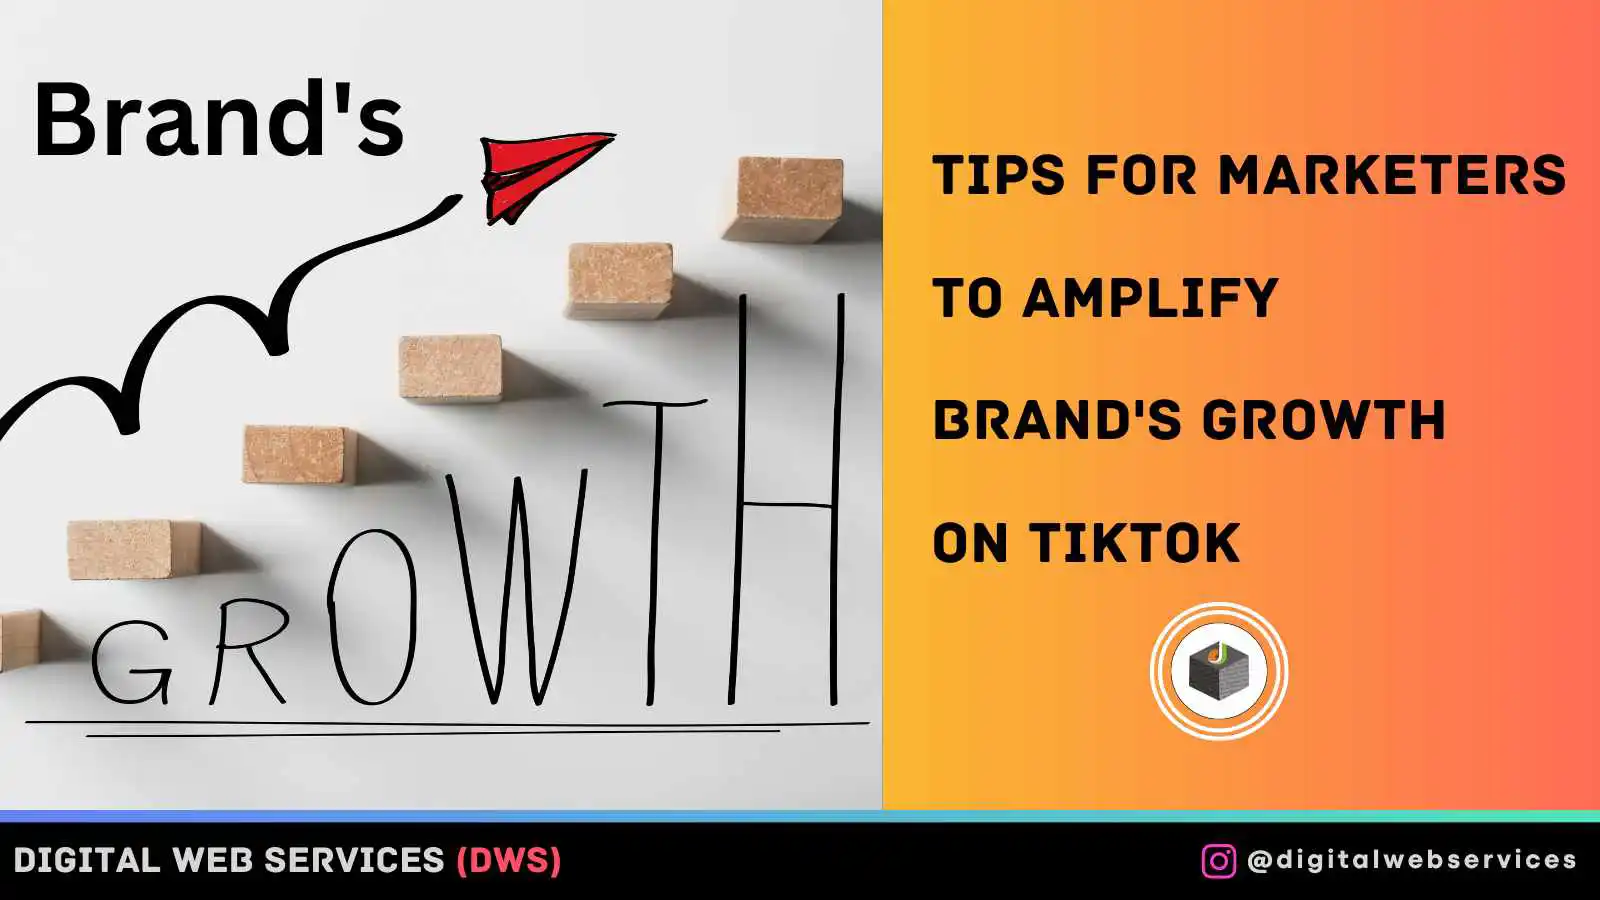 Tips for Marketers To Amplify Brand's Growth on TikTok